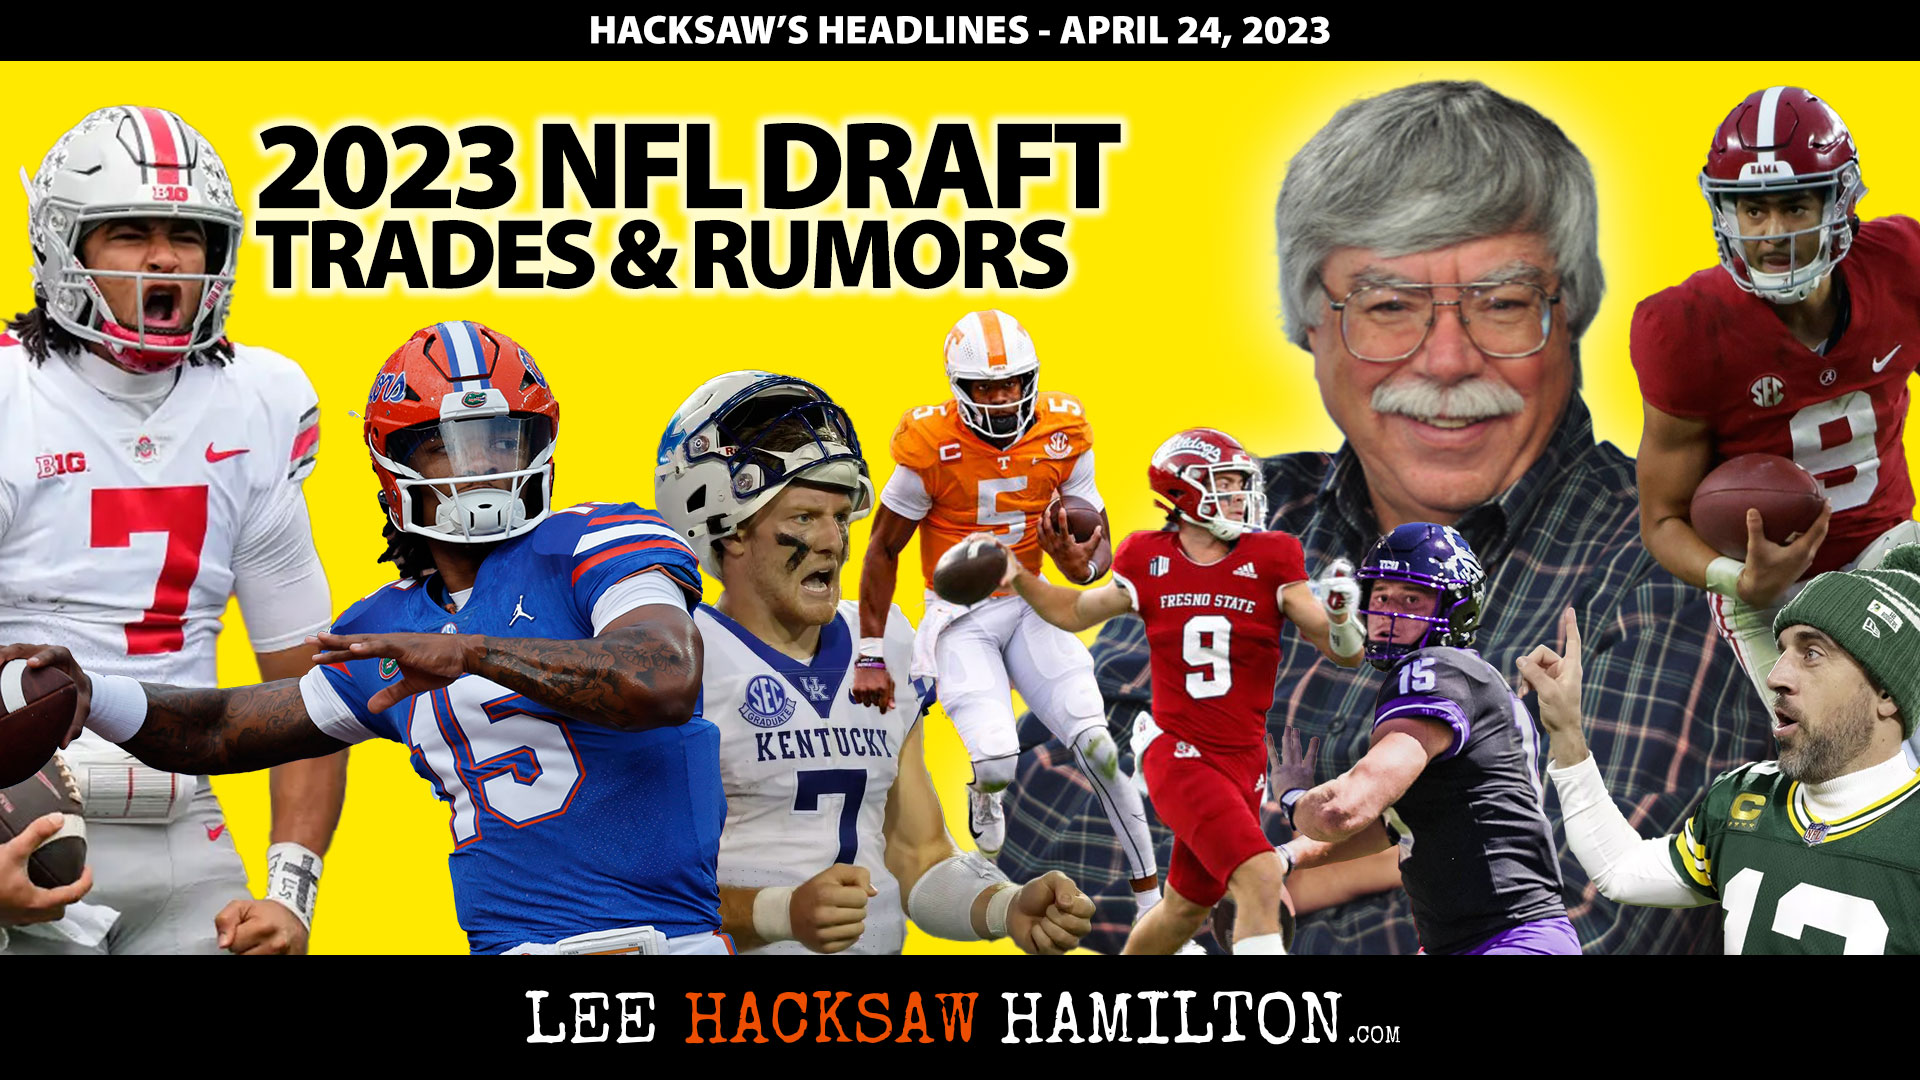 Lee Hacksaw Hamilton discusses the 2023 NFL Draft Preview